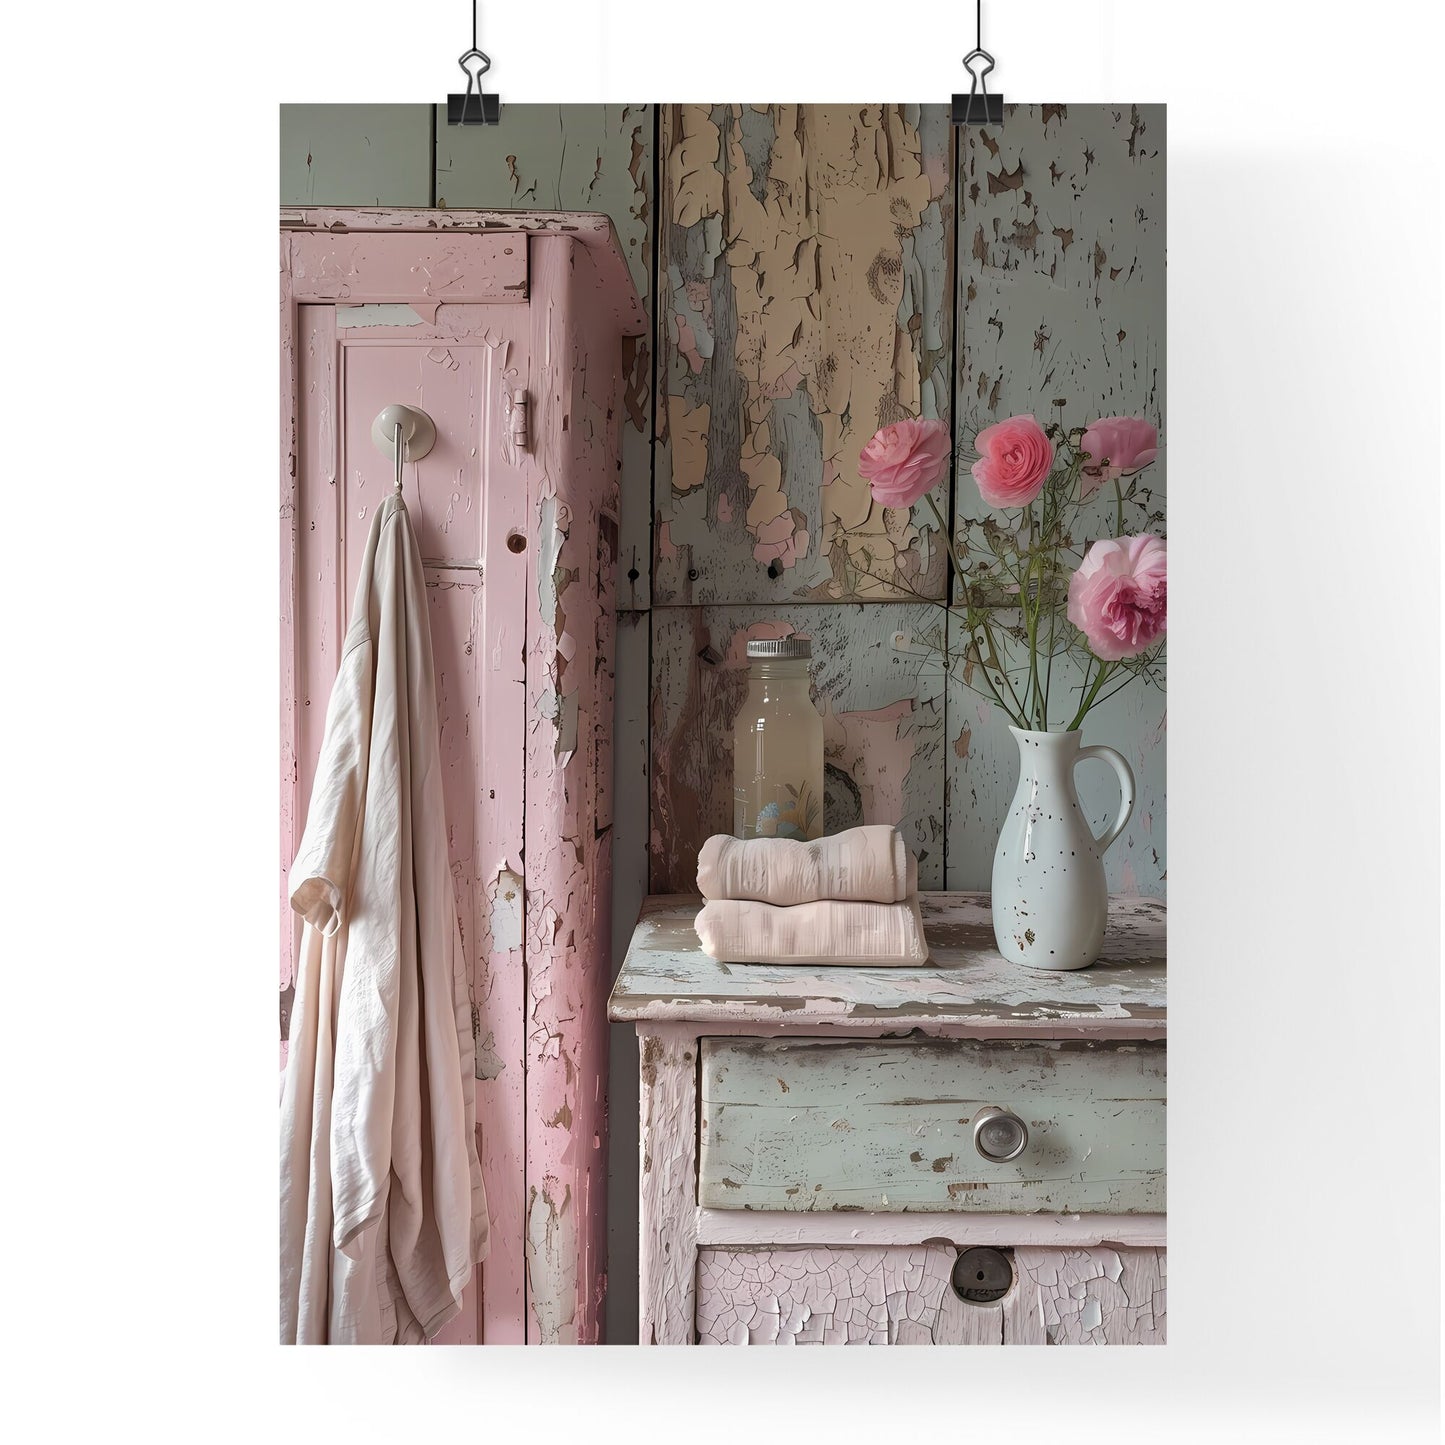 Pale Pink Vintage Bathroom Cabinet Floral Artwork White Vase Painting Distressed Shabby Chic Soft Lighting Neutral Tones Abstract Minimalistic Default Title